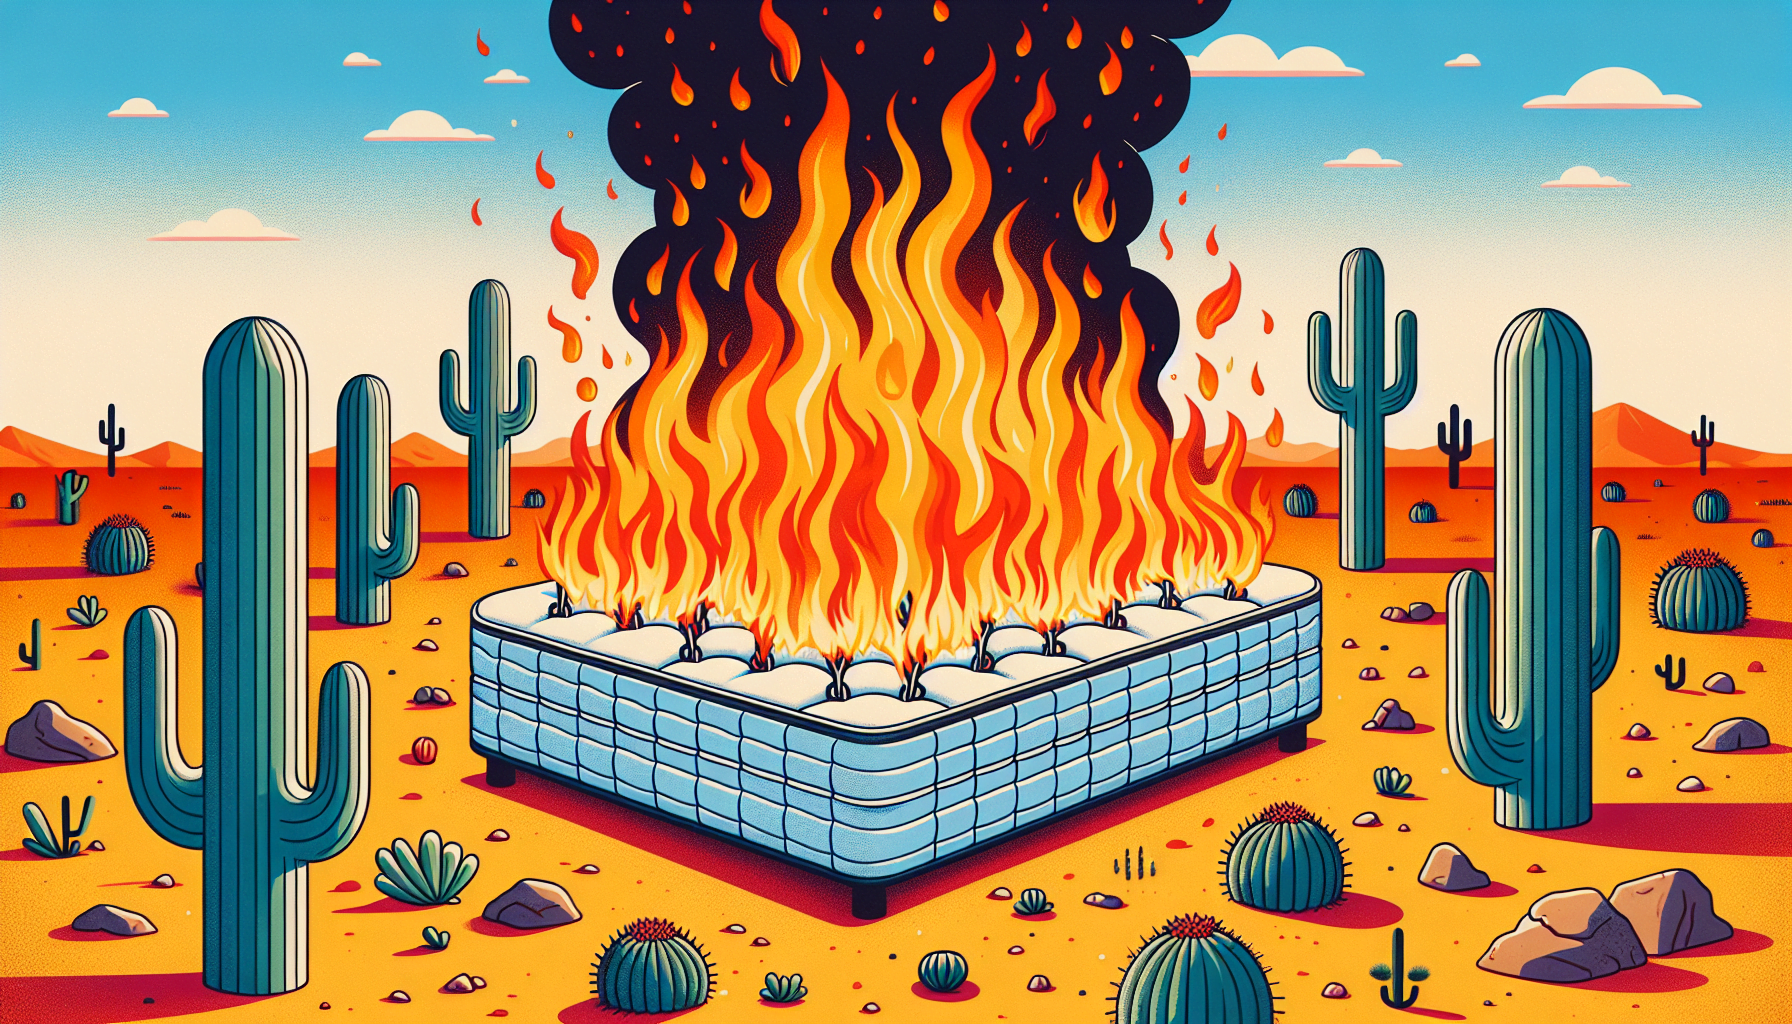 Texas Fire Codes and Mattress Burning